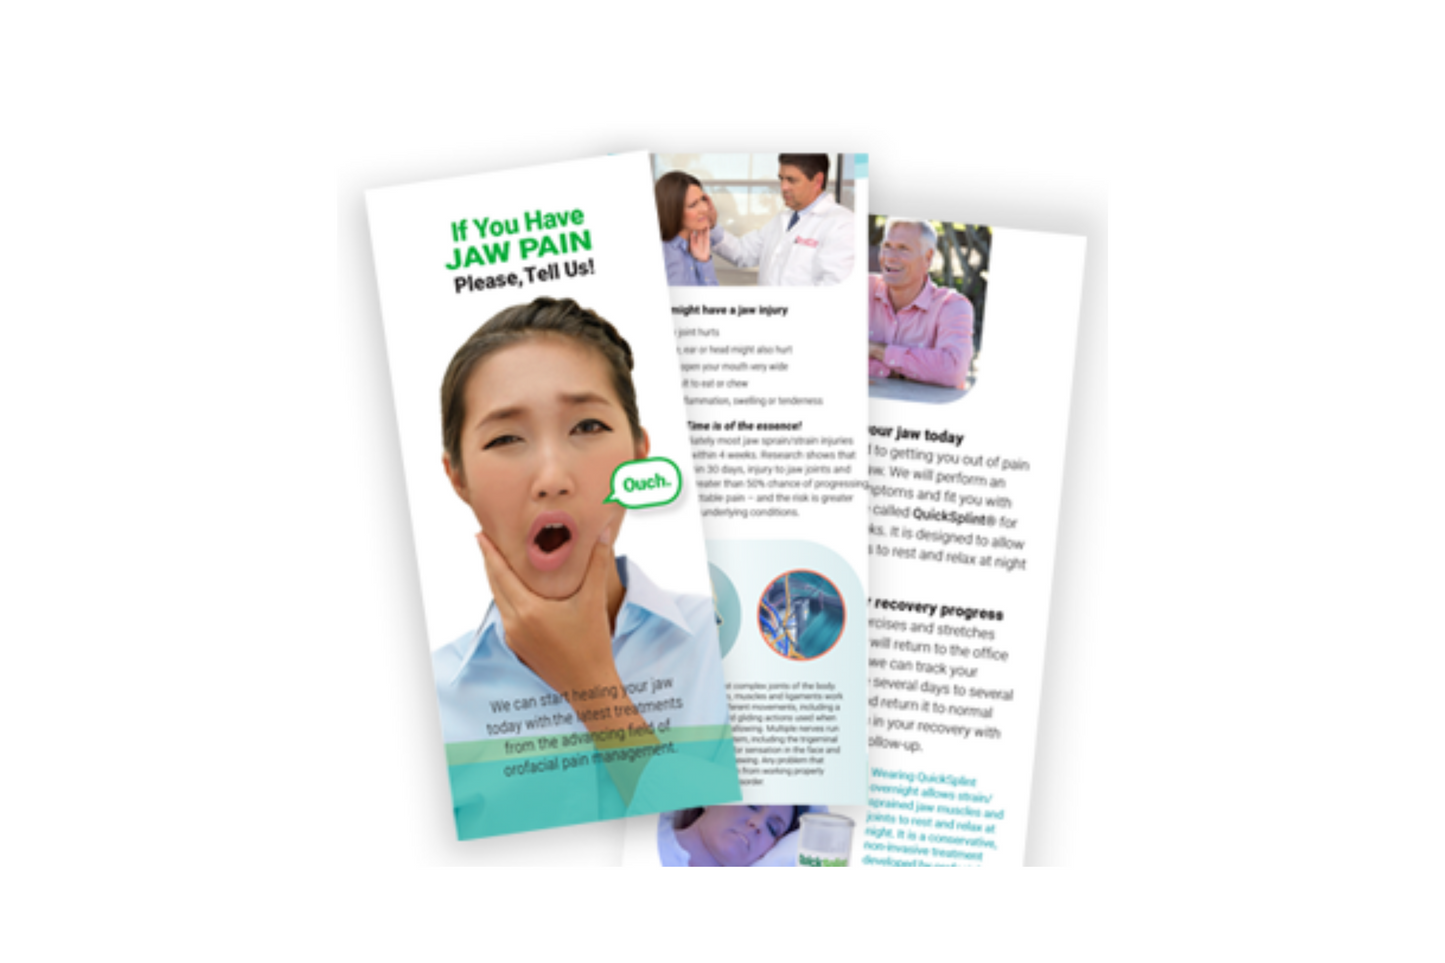 "If You Have Jaw Pain" Flyer